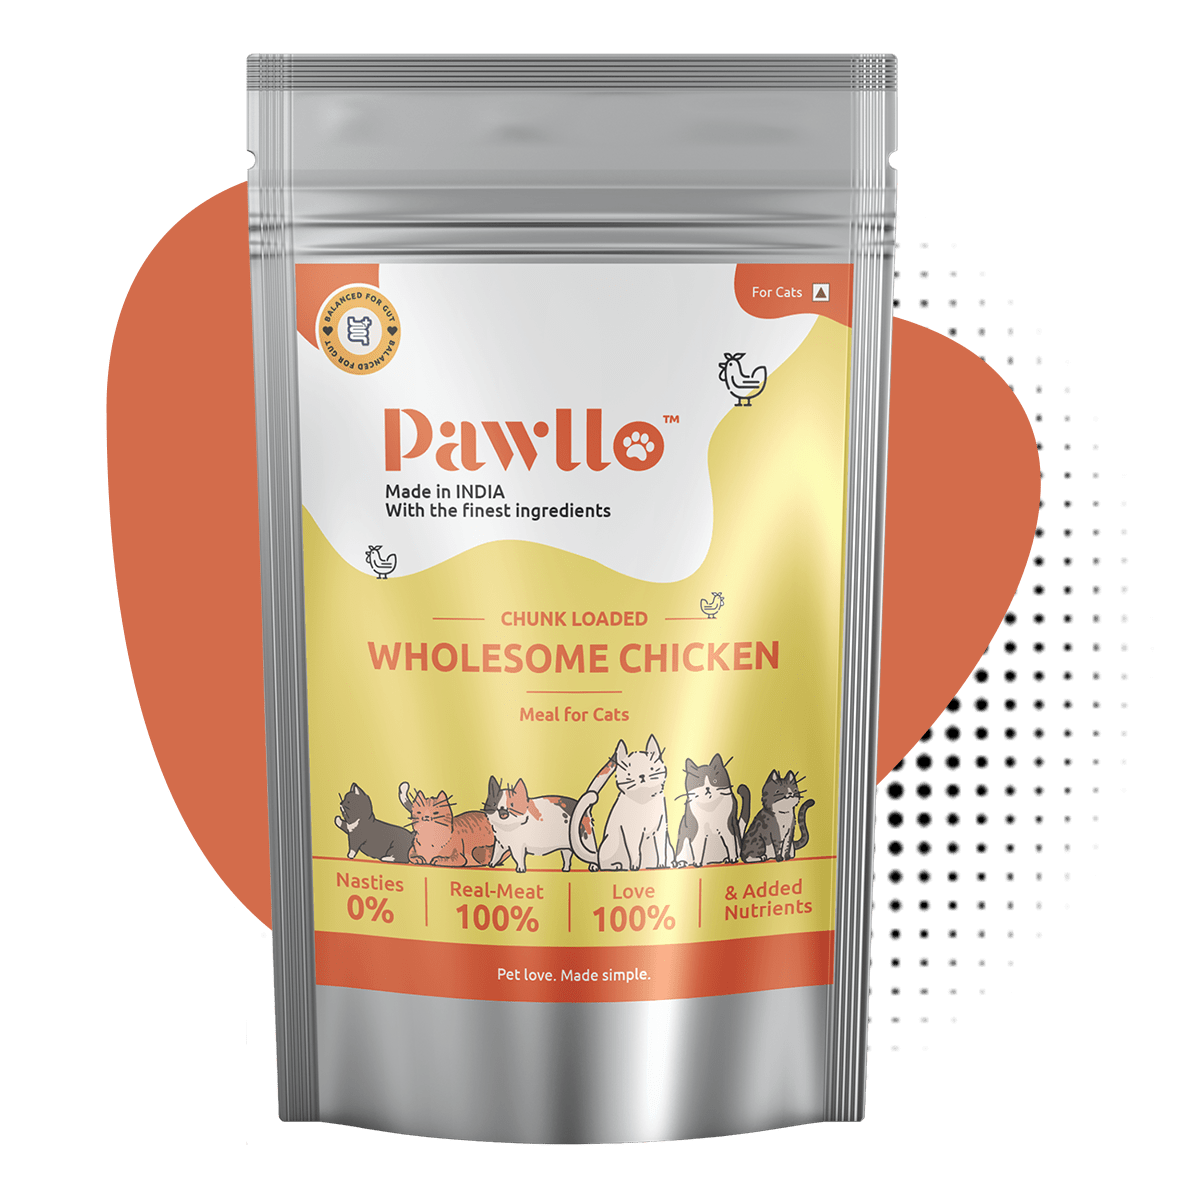 Wholesome Chicken Gravy (Cats) - Omega-3 Rich, Protein-Packed Balanced Meal with Seafood Extracts, Flaxseed Powder, and More